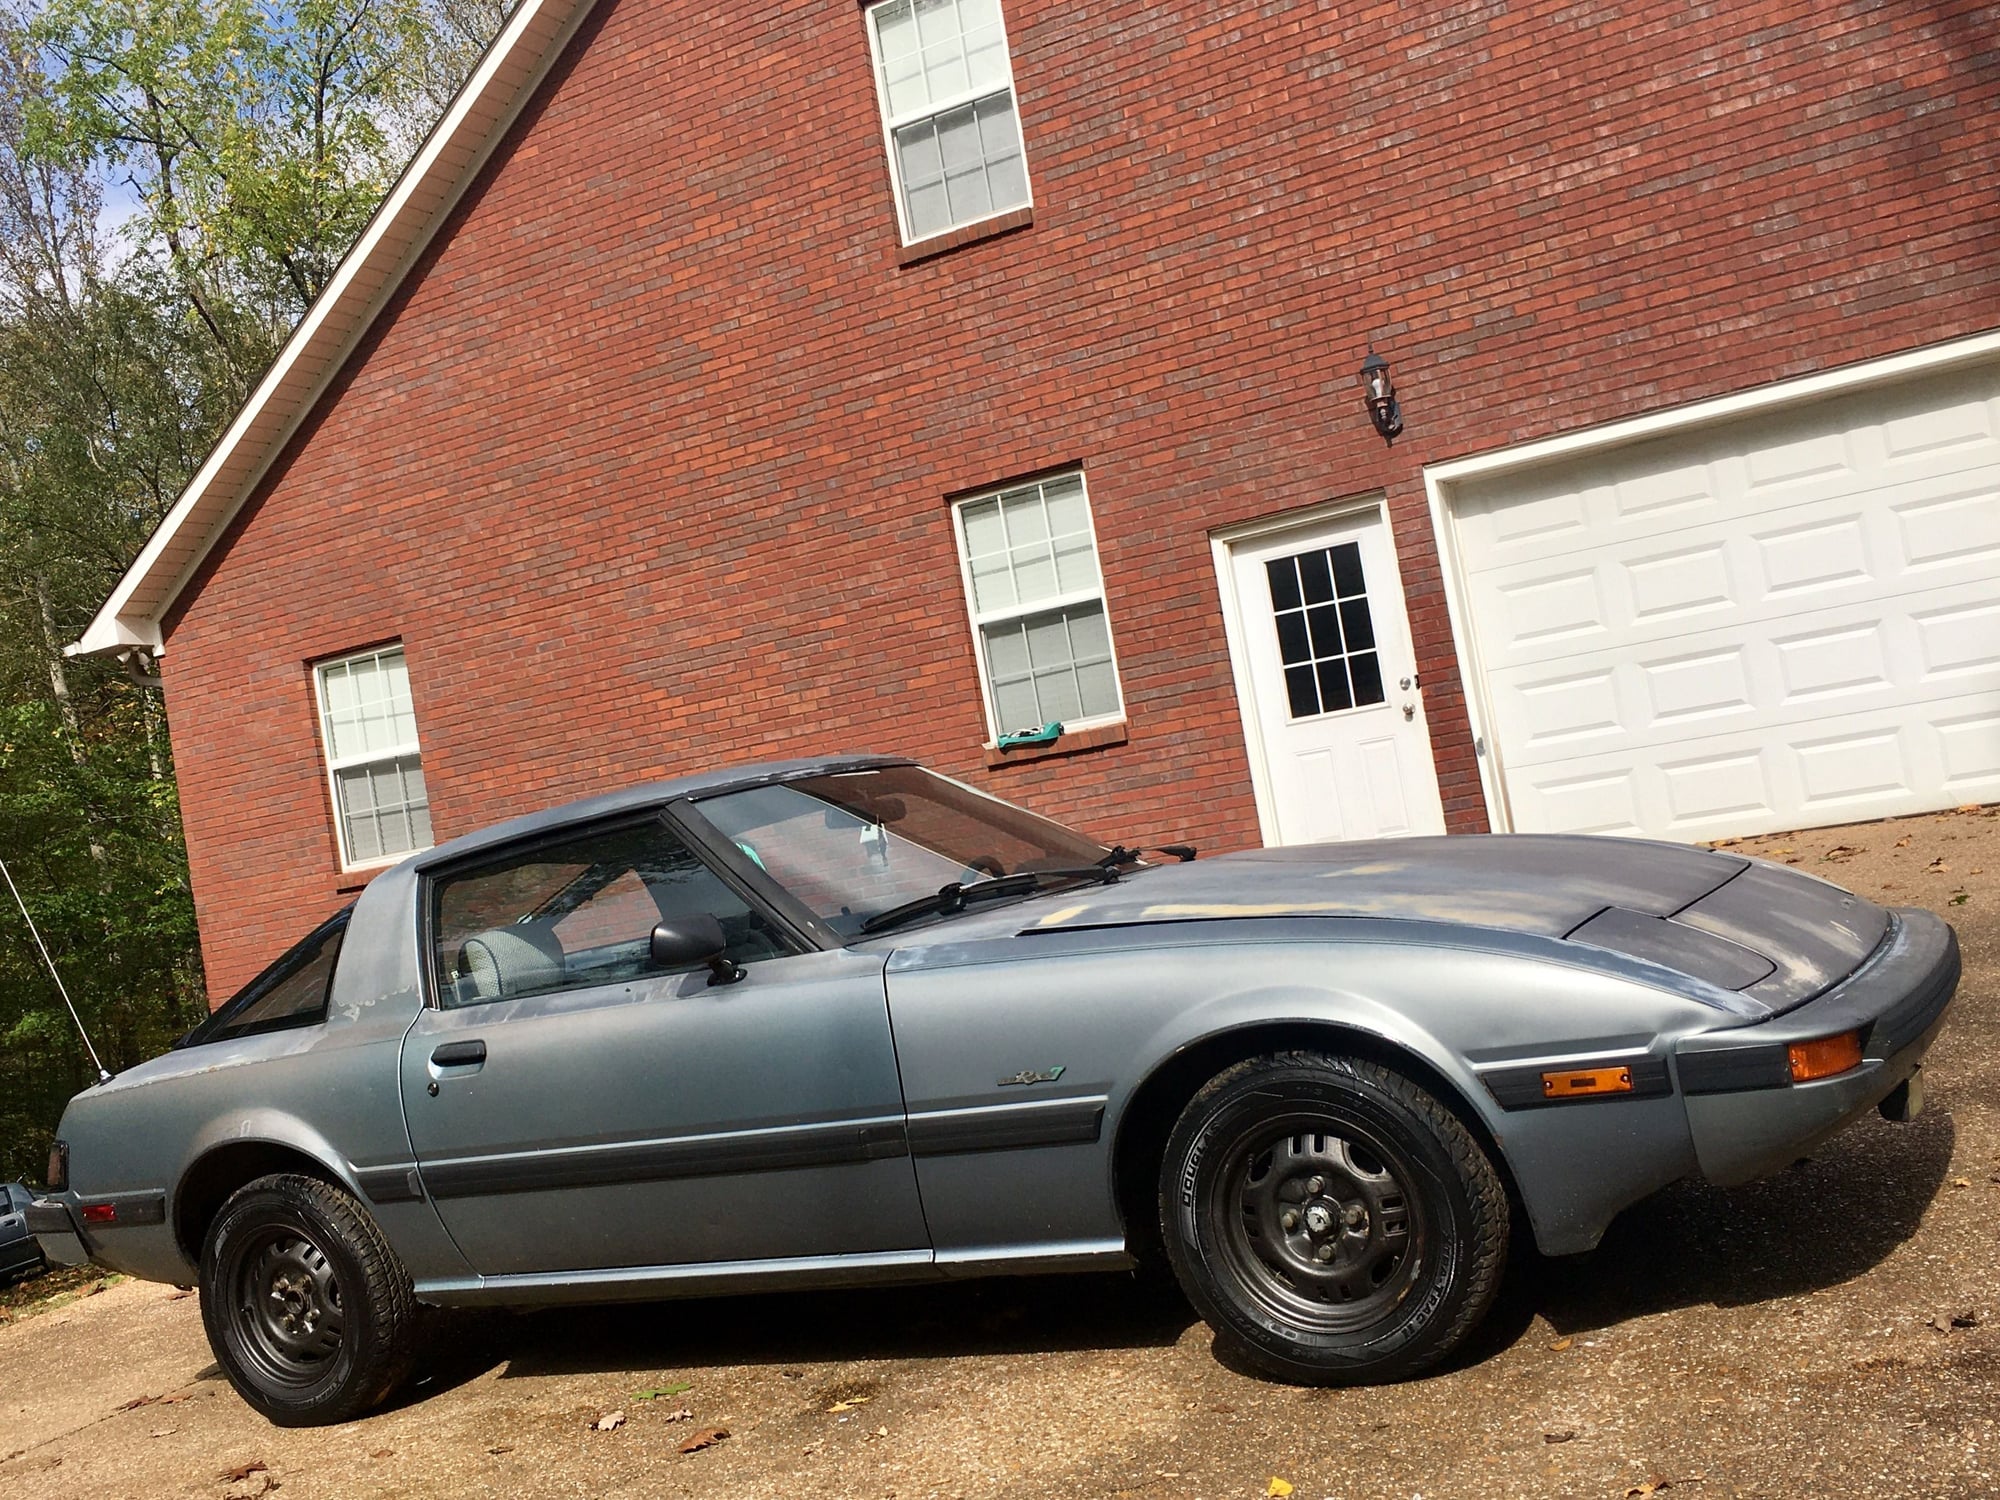 Straight - Solid - Southern '85 GS For Sale - RX7Club.com ...